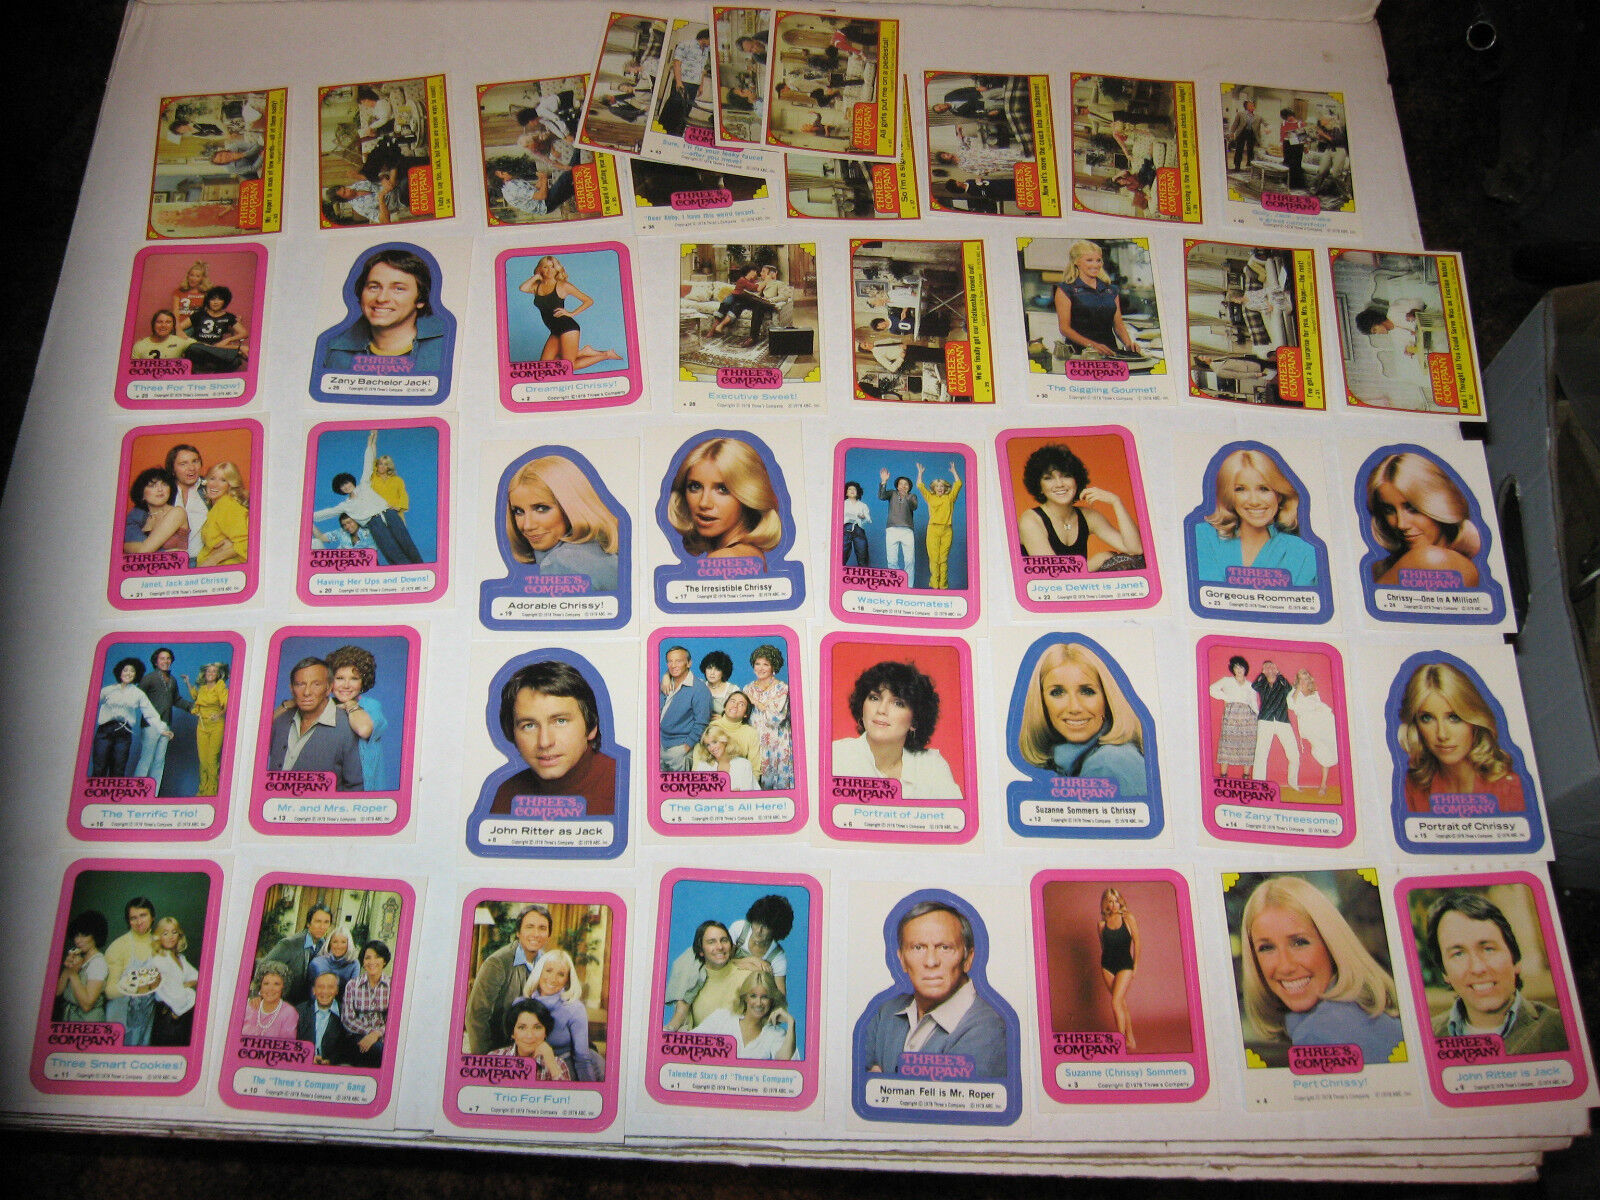 1978 Topps THREES COMPANY TV Show 44 Card Sticker Set Suzanne Summers Somers Pho